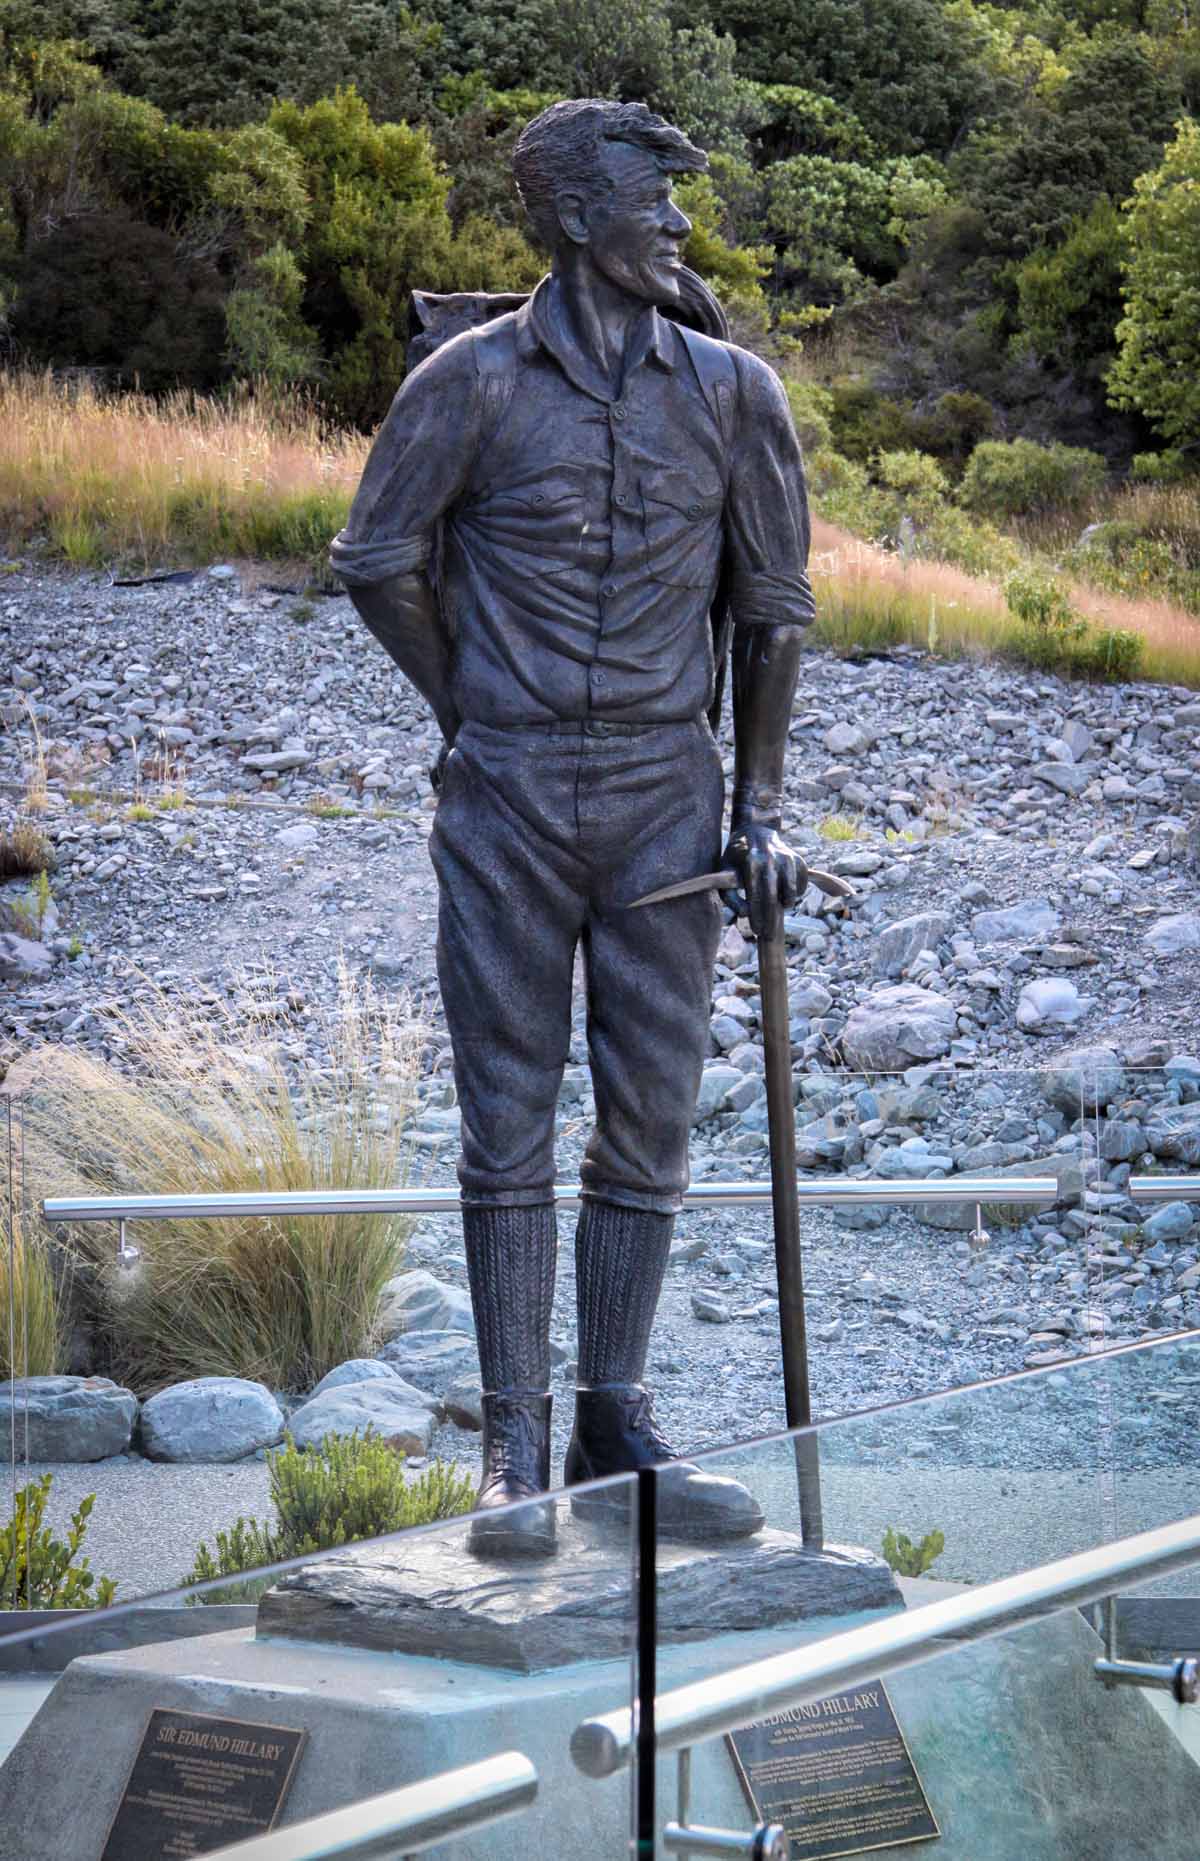 A statue of Sir Edmund Hillary is situated at the Aoraki/Mount Cook Village with views in the background of Mount Cook which he climbed in 1948